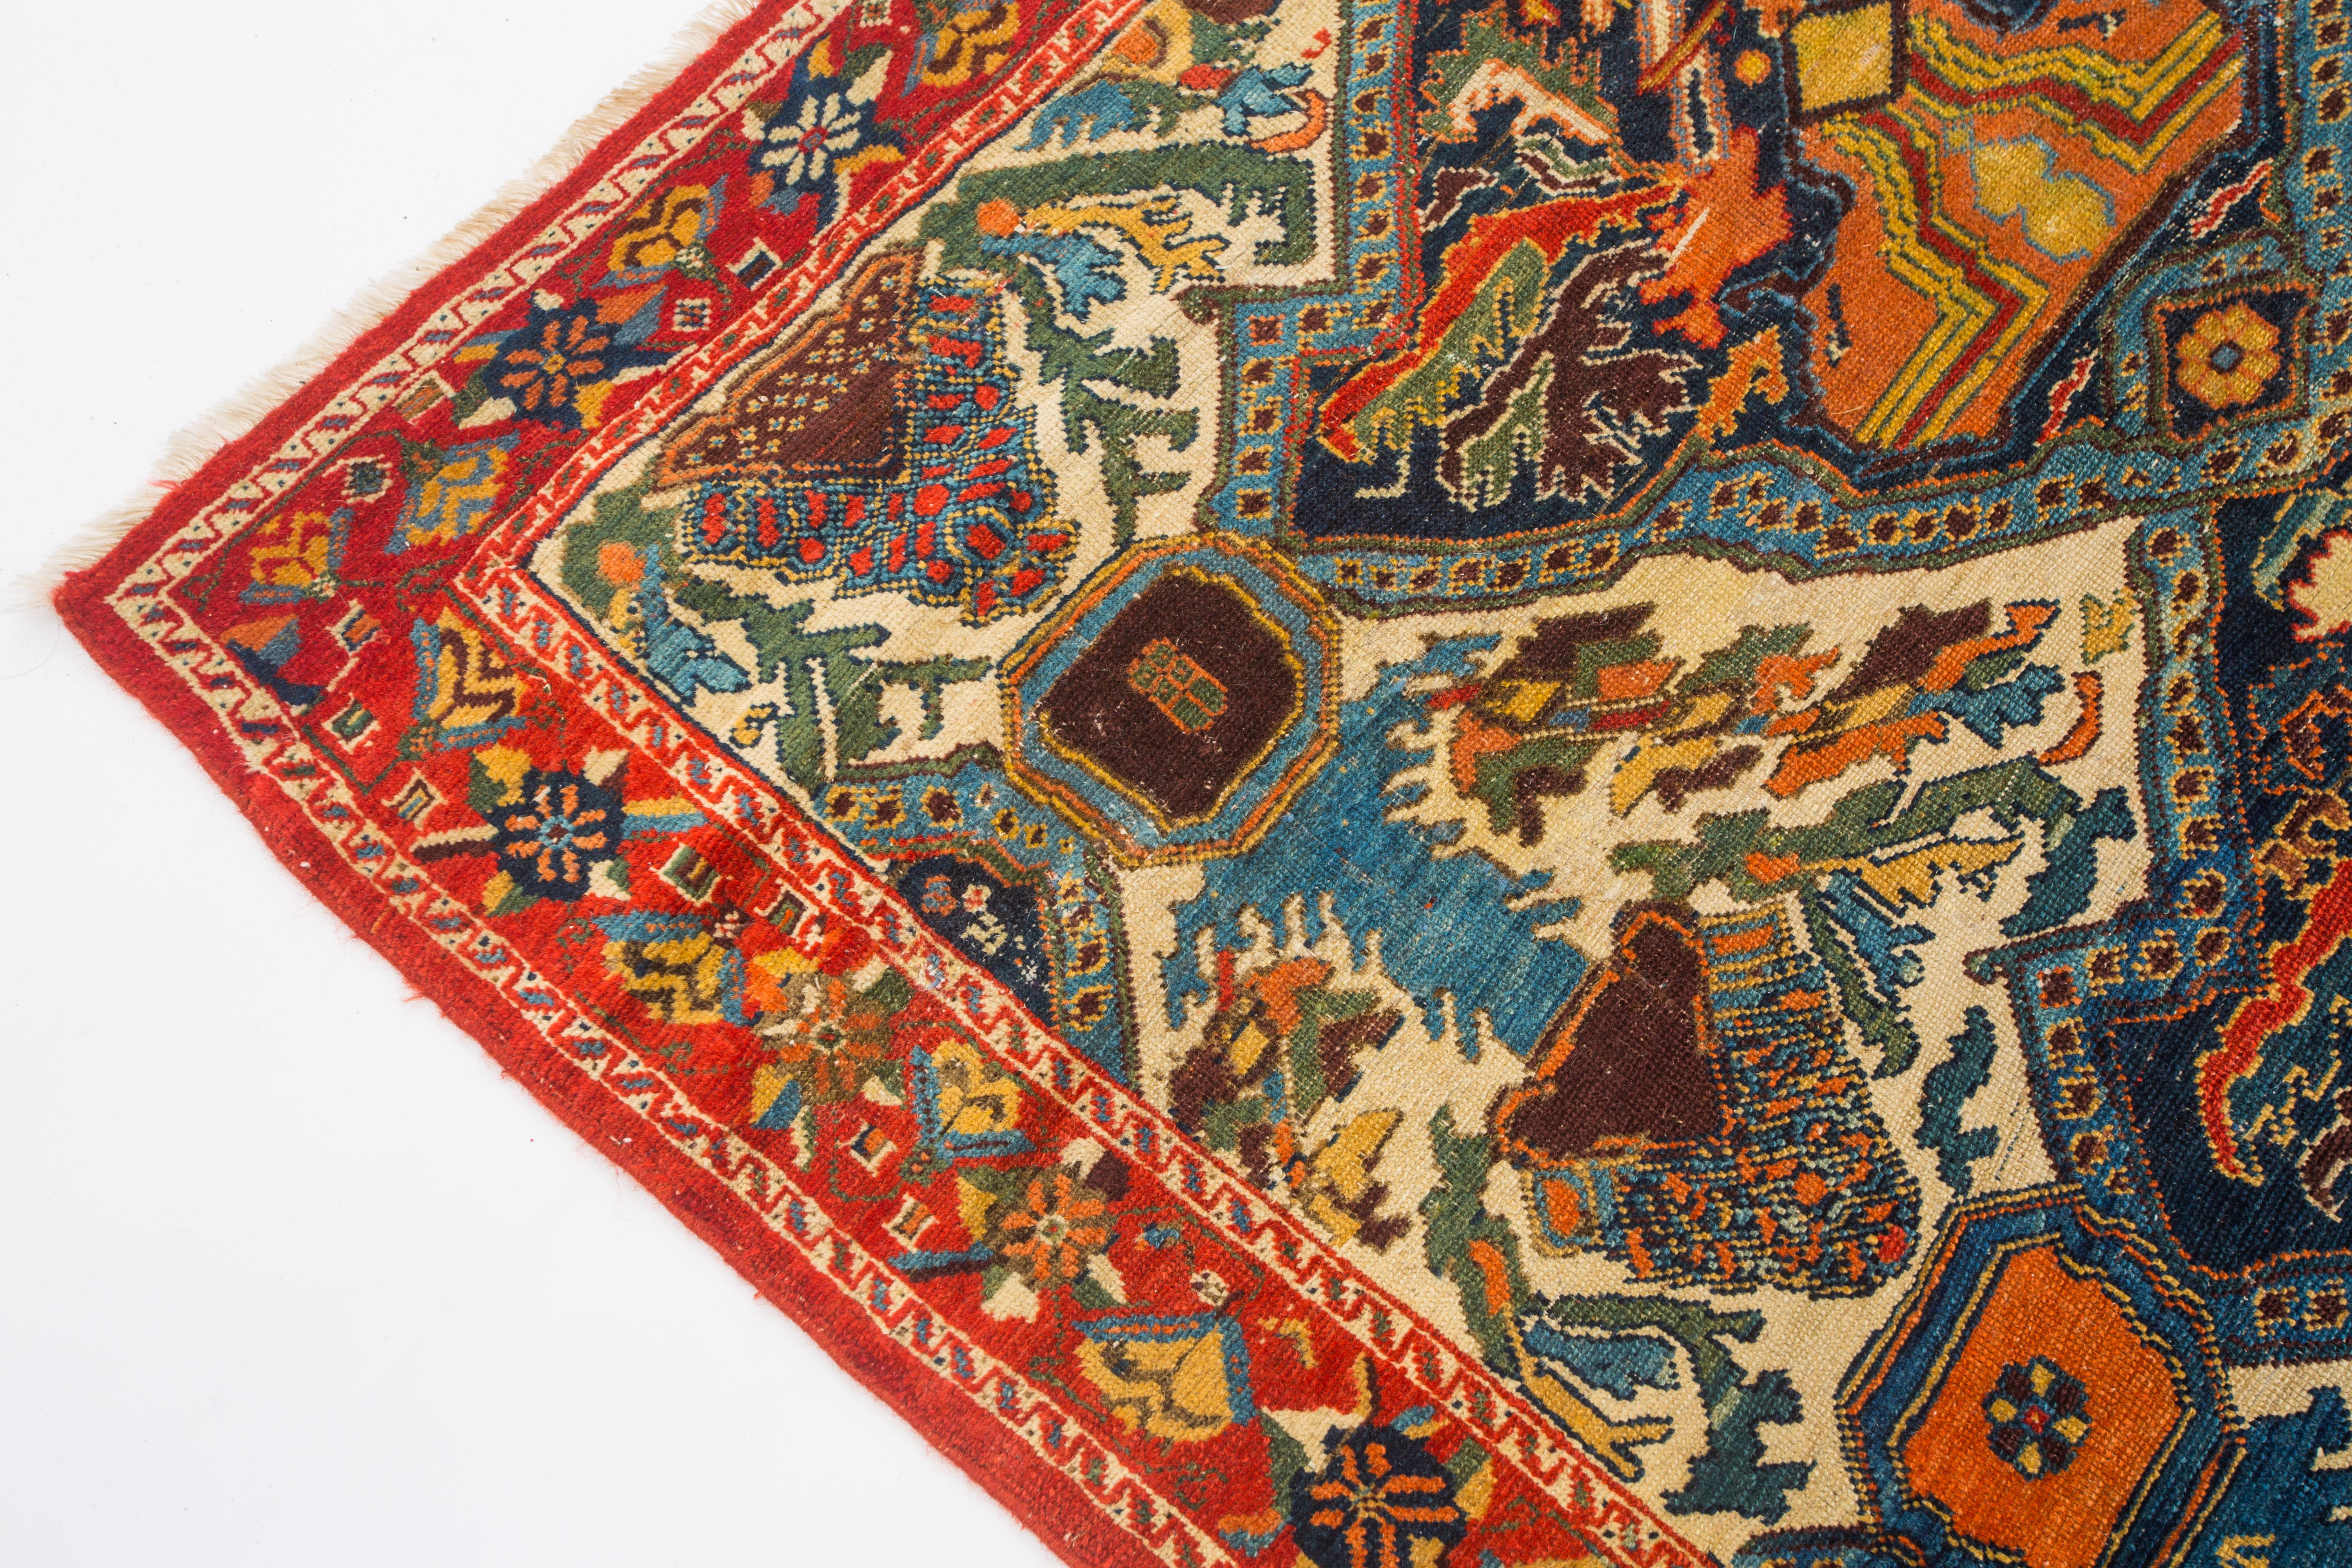 Astonishing 19th Century Rare Afshar Tribal rug  featured in famous book  In Good Condition For Sale In WYNNUM, QLD